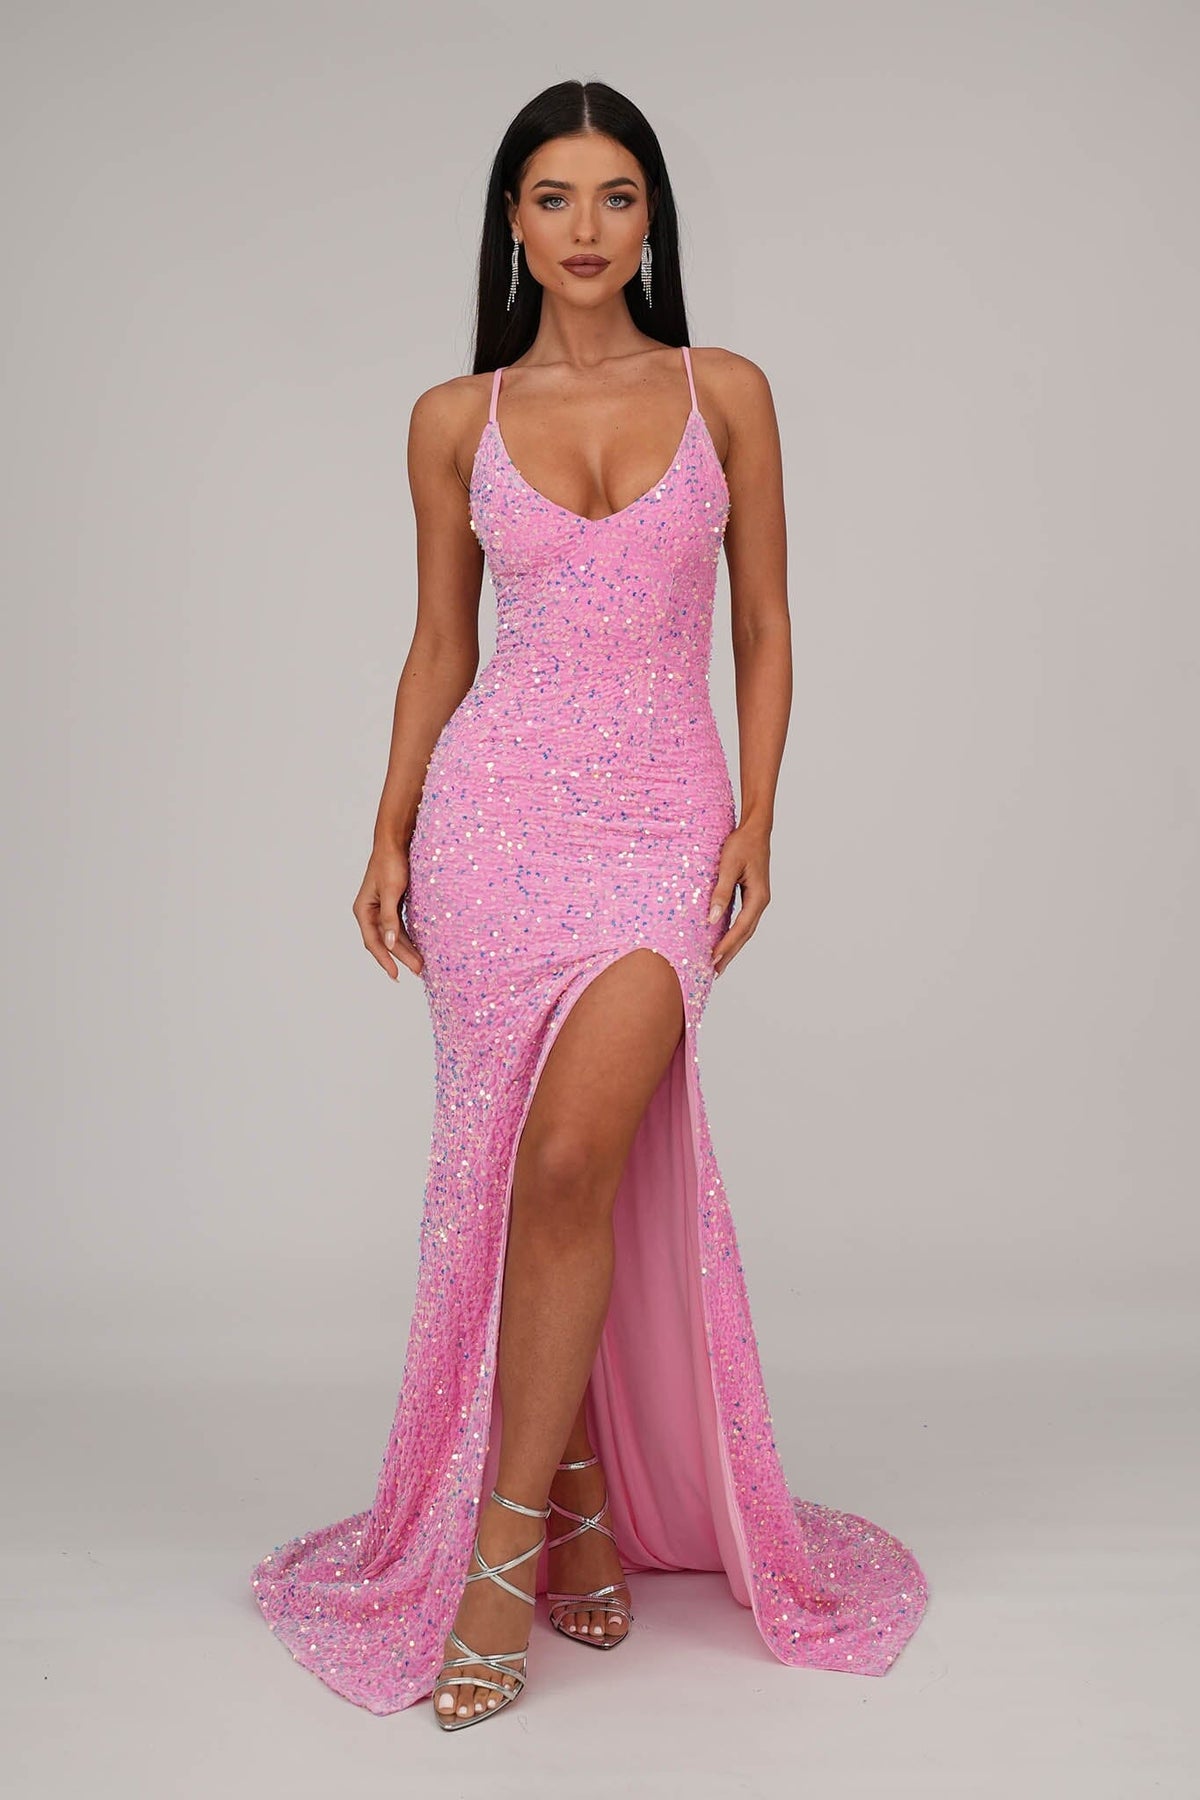 Pink Velvet Sequin Full Length Evening Gown with V Neckline, Thin Shoulder Straps, Thigh High Side Split and Lace Up Open Back